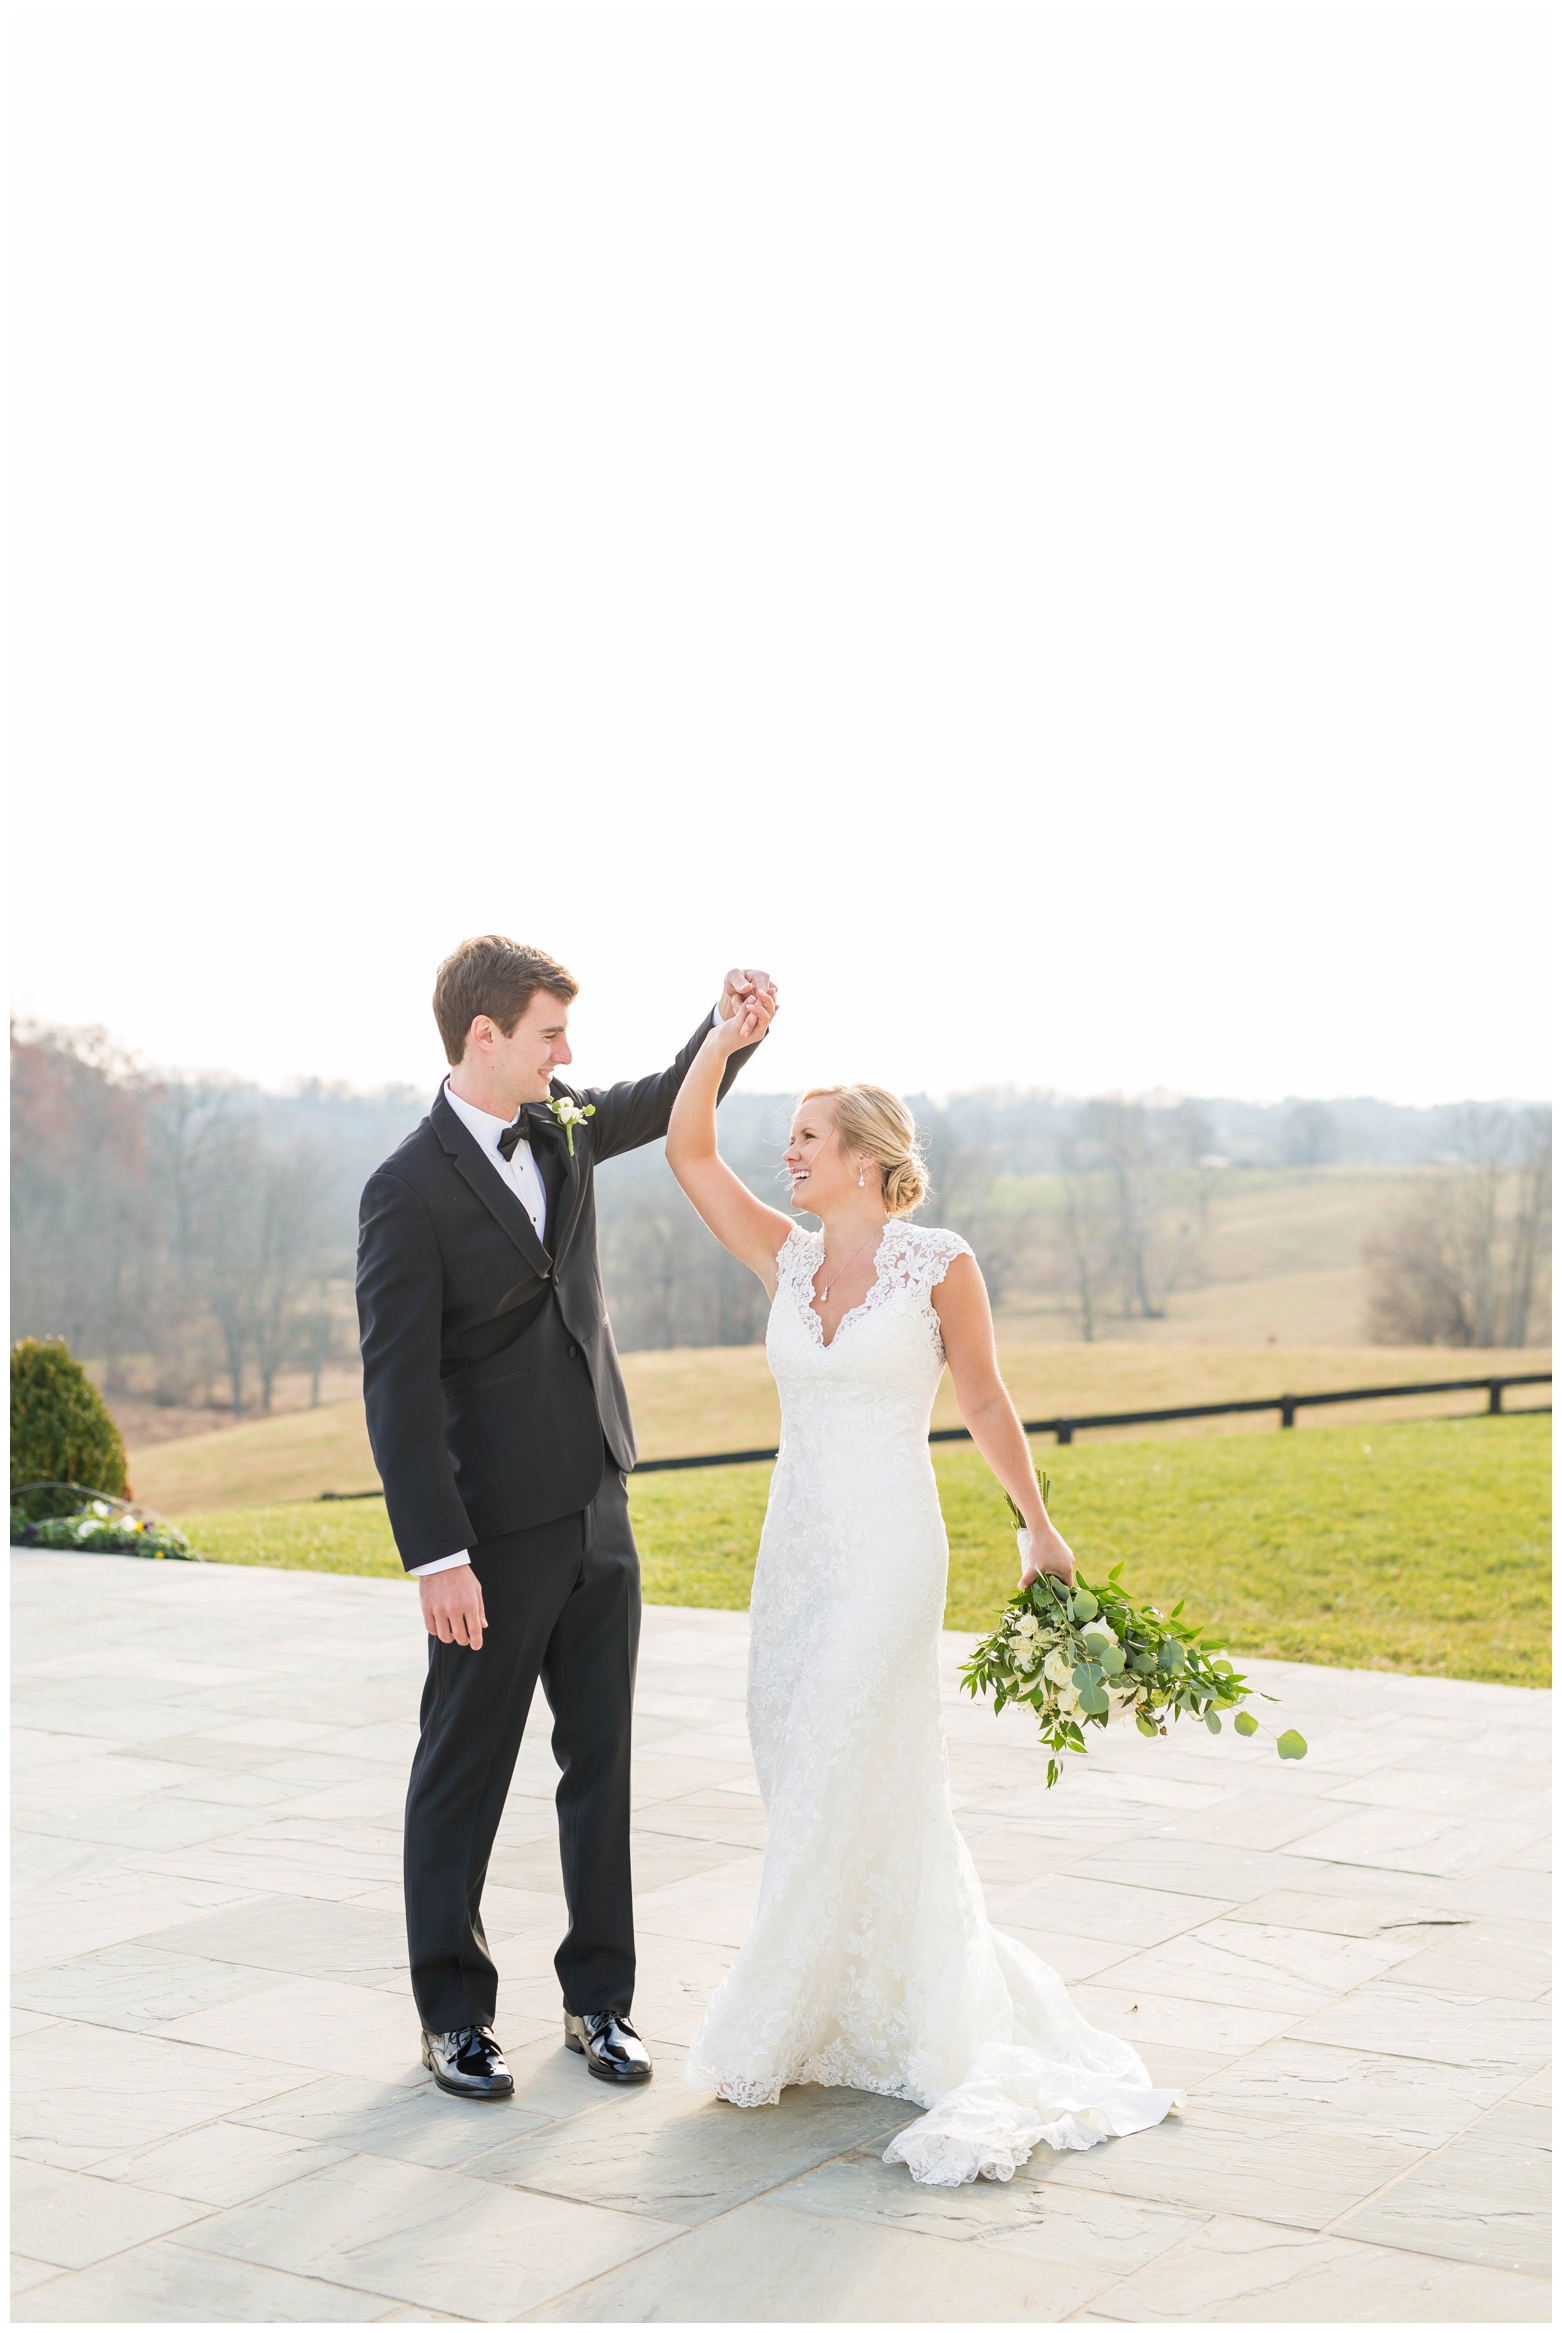 View More: http://hopetaylorphotographyphotos.pass.us/annie-and-paul-wedding